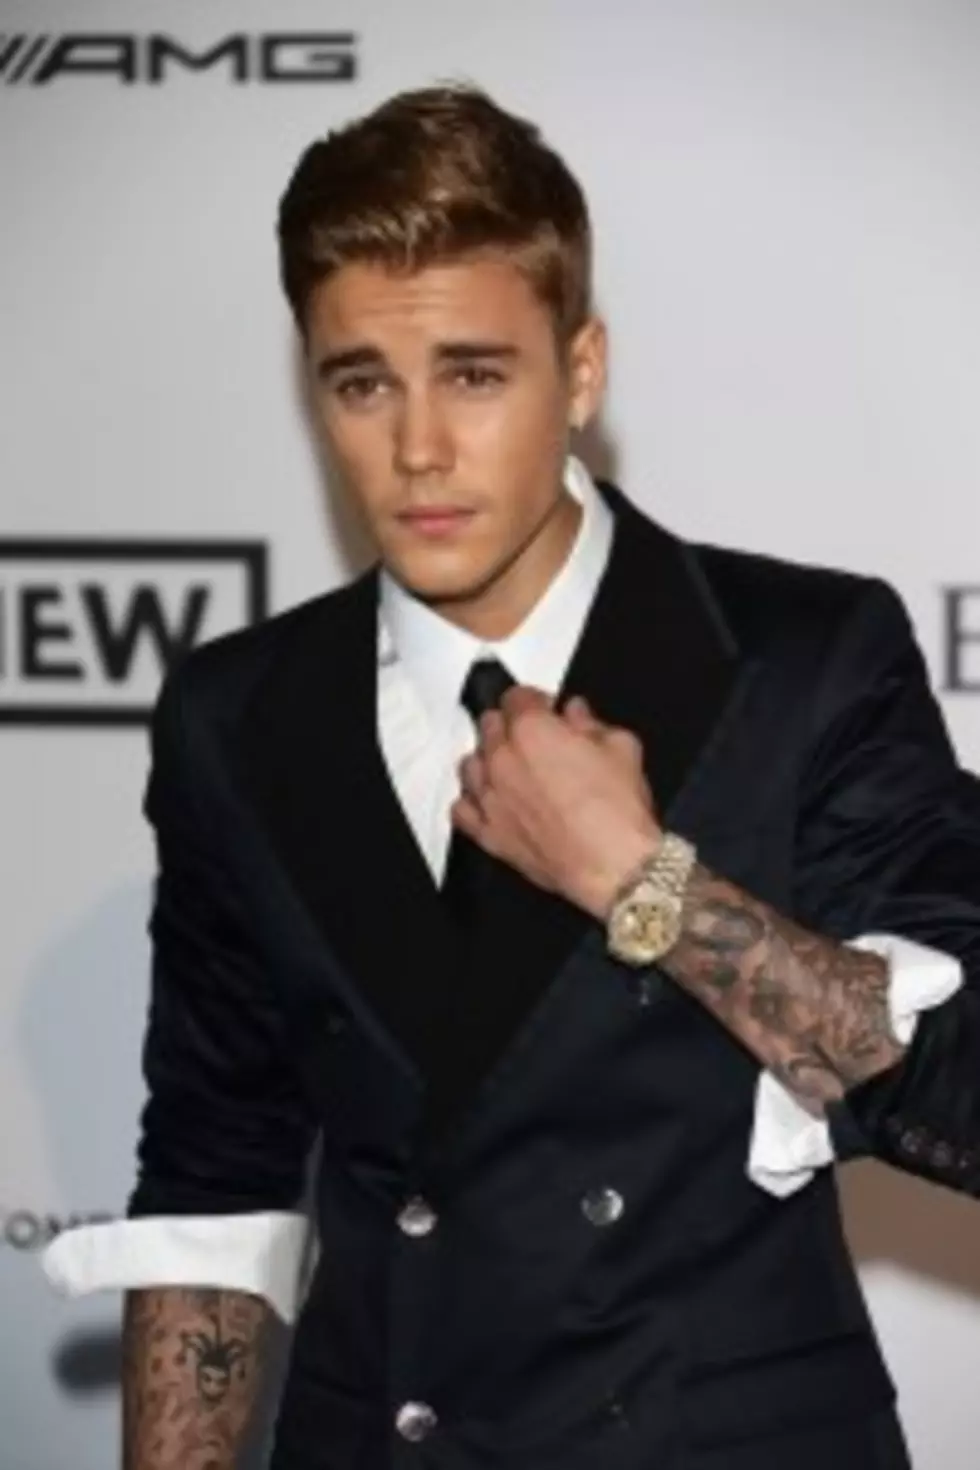 Justin Bieber Caught Using The N-Word